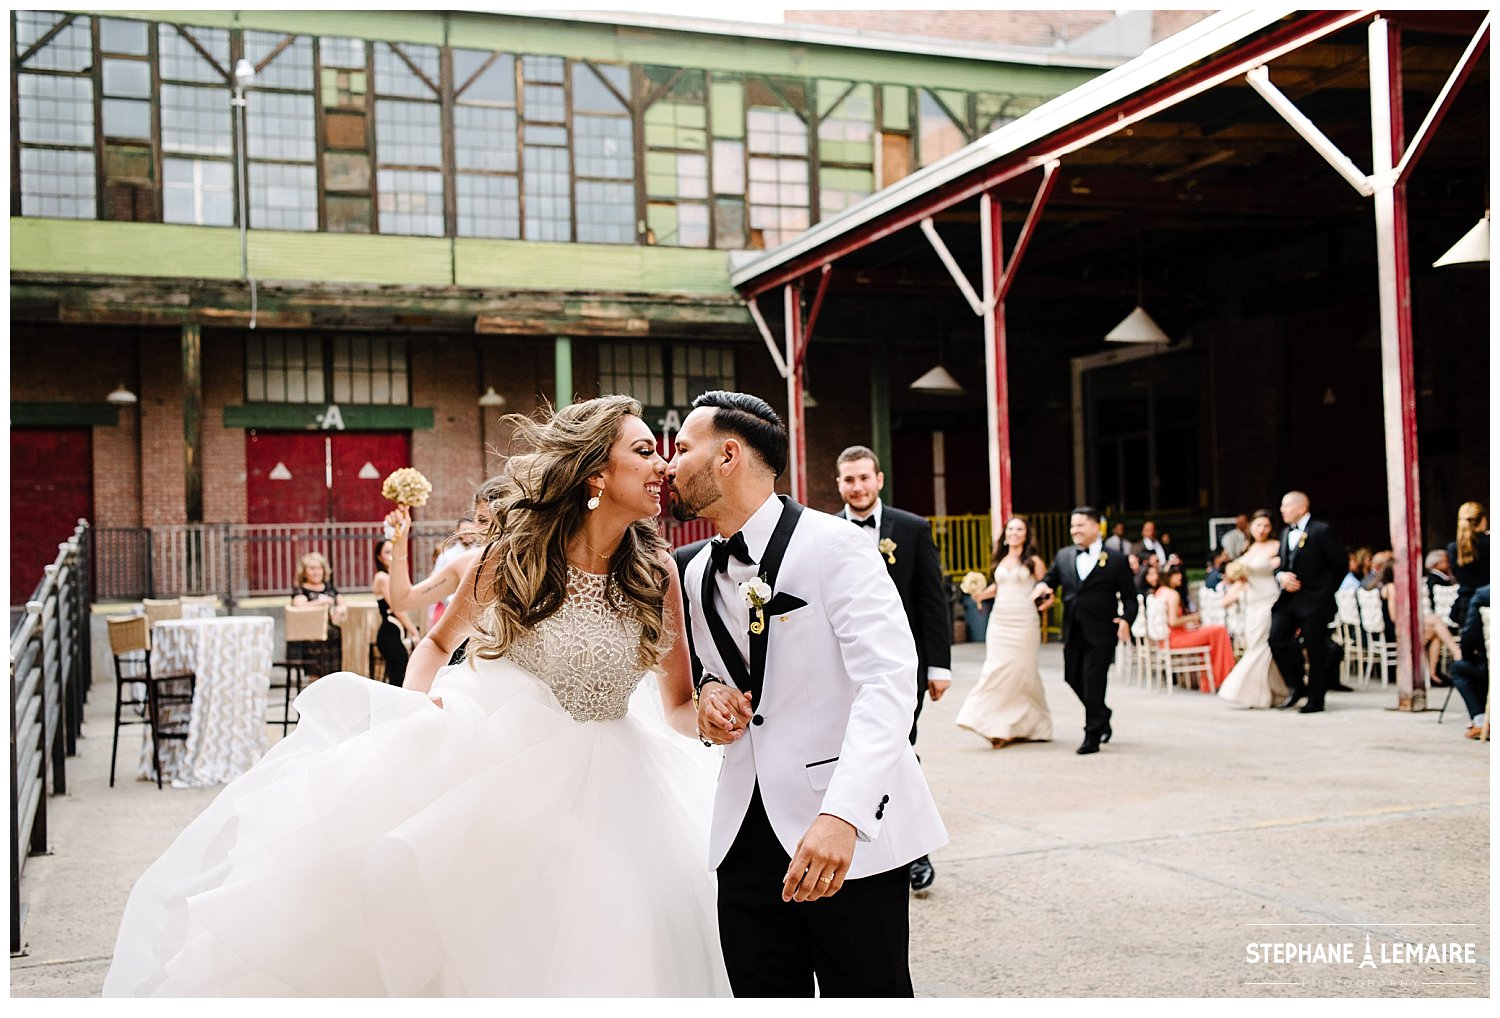 Epic Railyard  wedding ceremony exit pictures by Stephane Lemaire